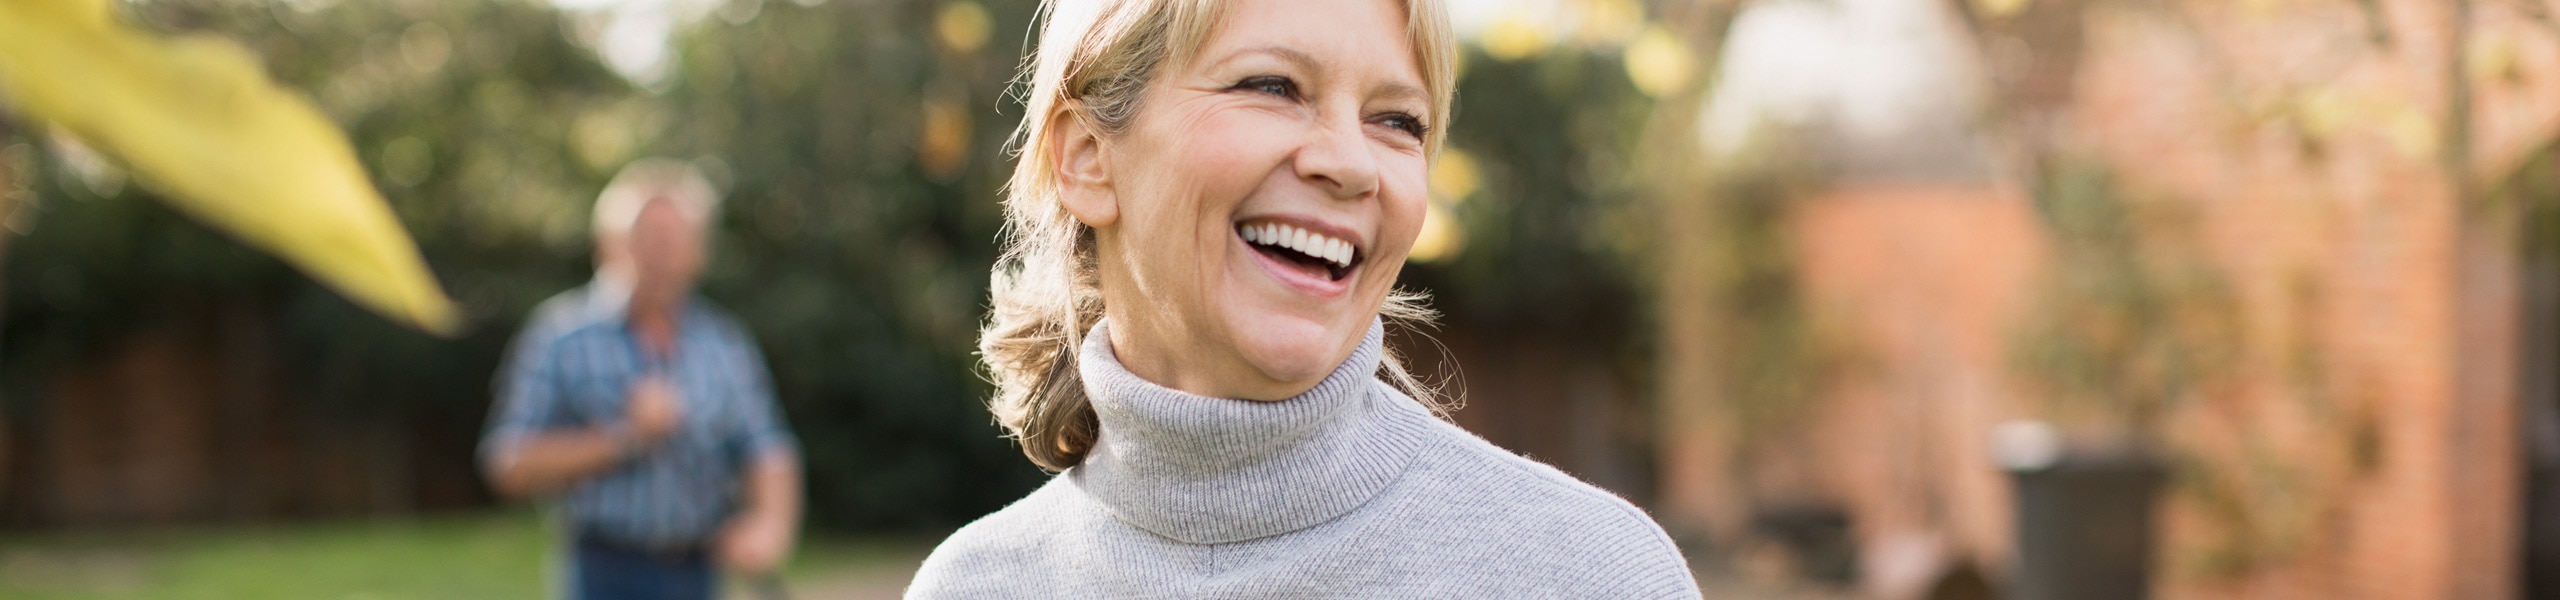 Woman wearing a turtleneck laughs outdoors